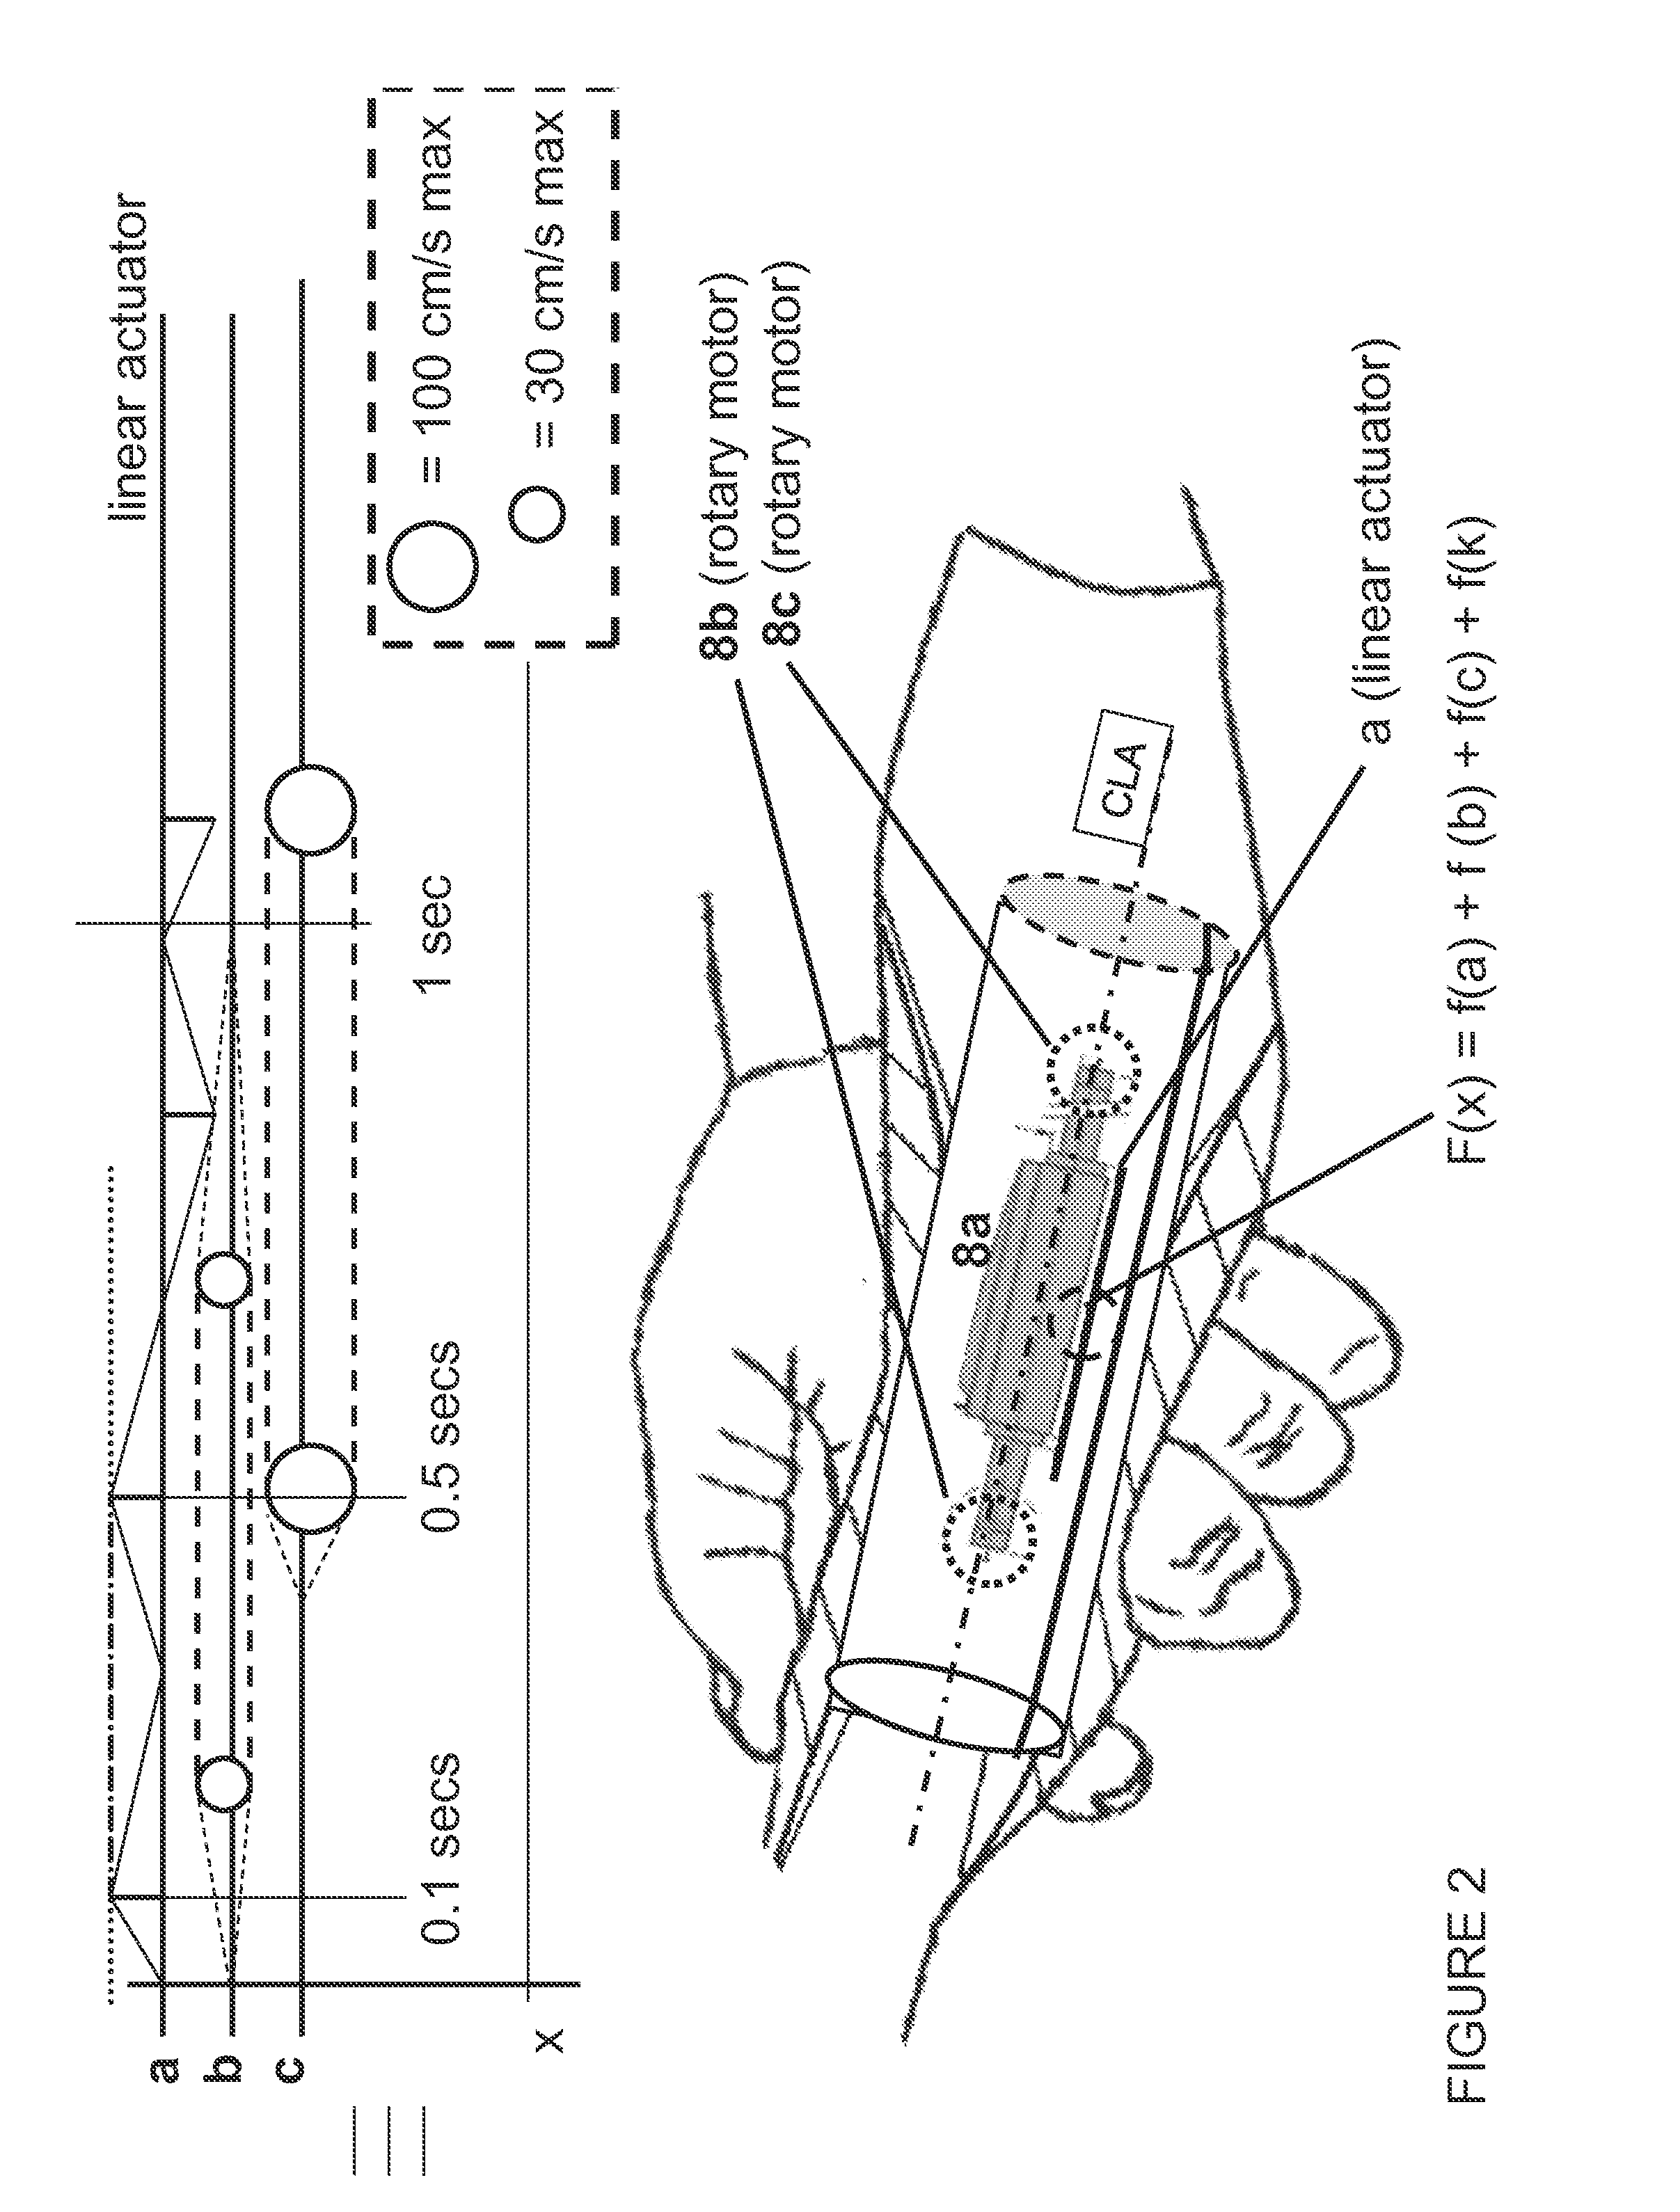 Operating system with haptic interface for minimally invasive, hand-held surgical instrument